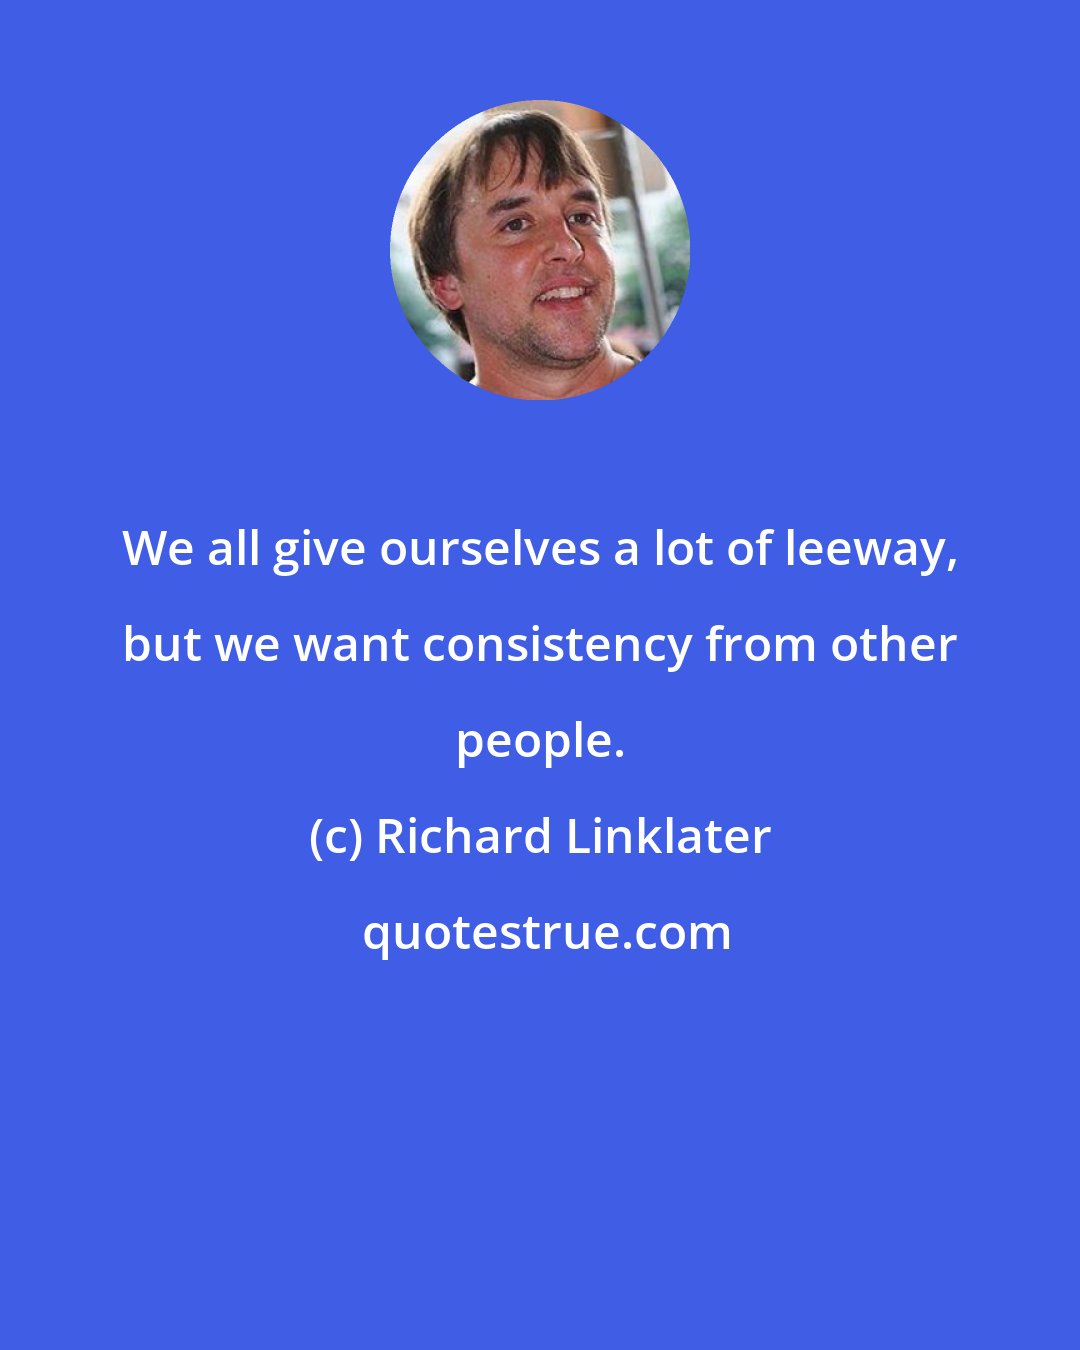 Richard Linklater: We all give ourselves a lot of leeway, but we want consistency from other people.